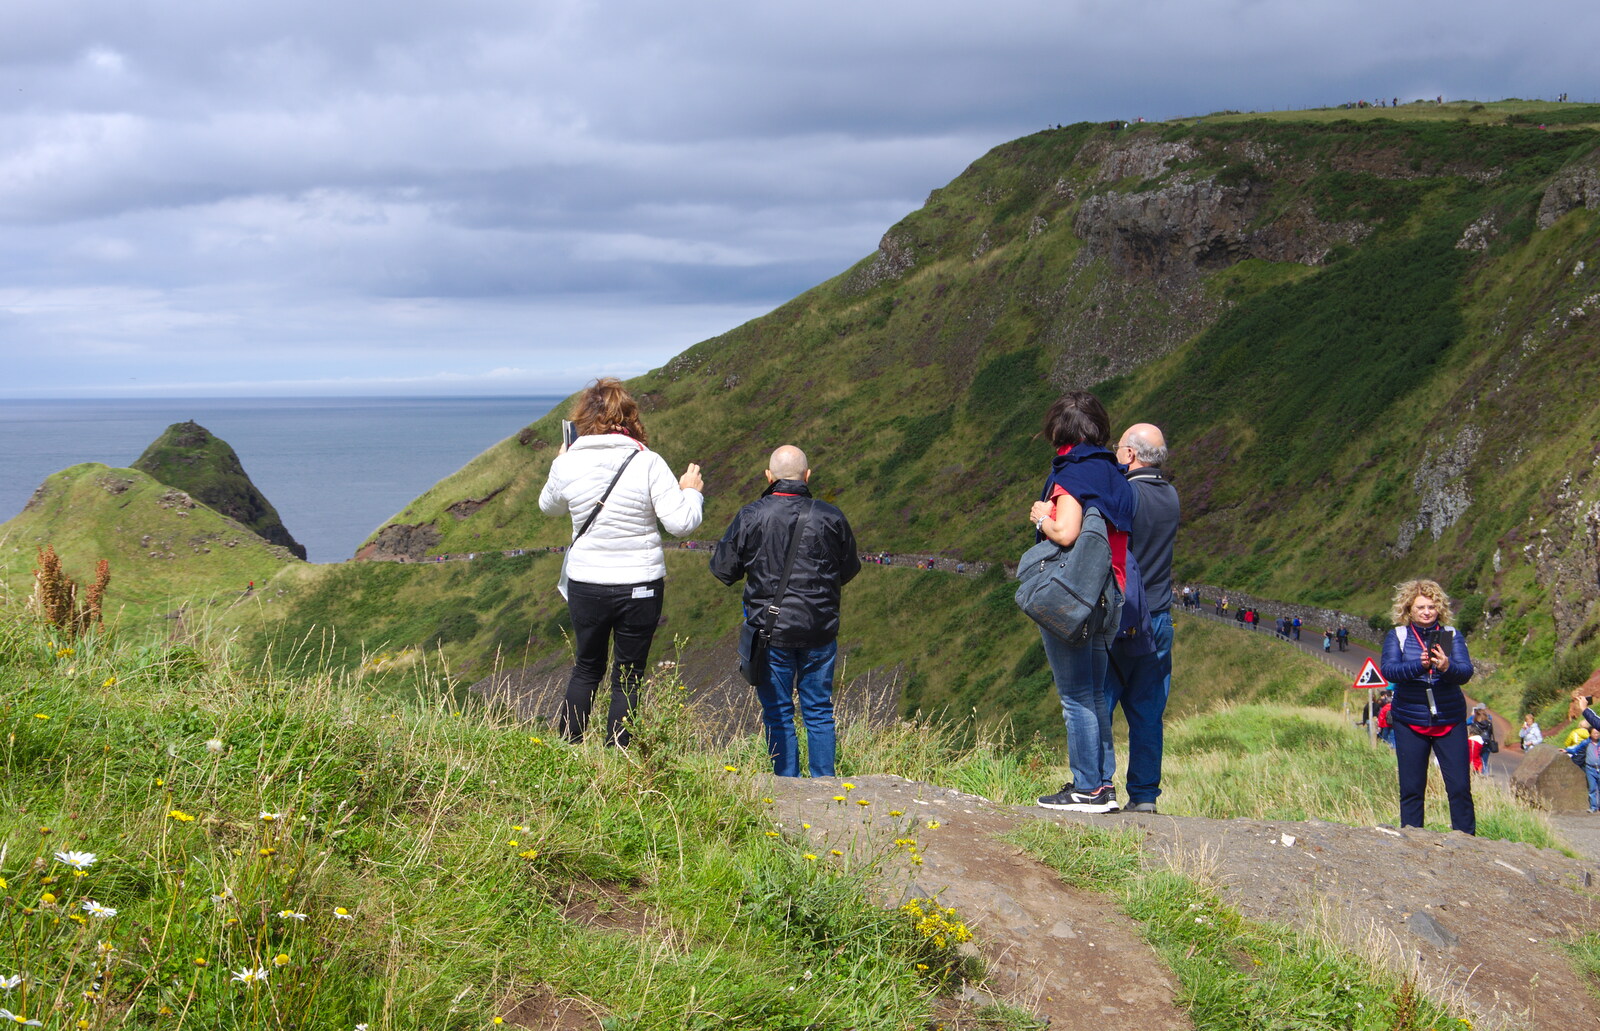 People at the top of a hill from The Giant's Causeway, Bushmills, County Antrim, Northern Ireland - 14th August 2019